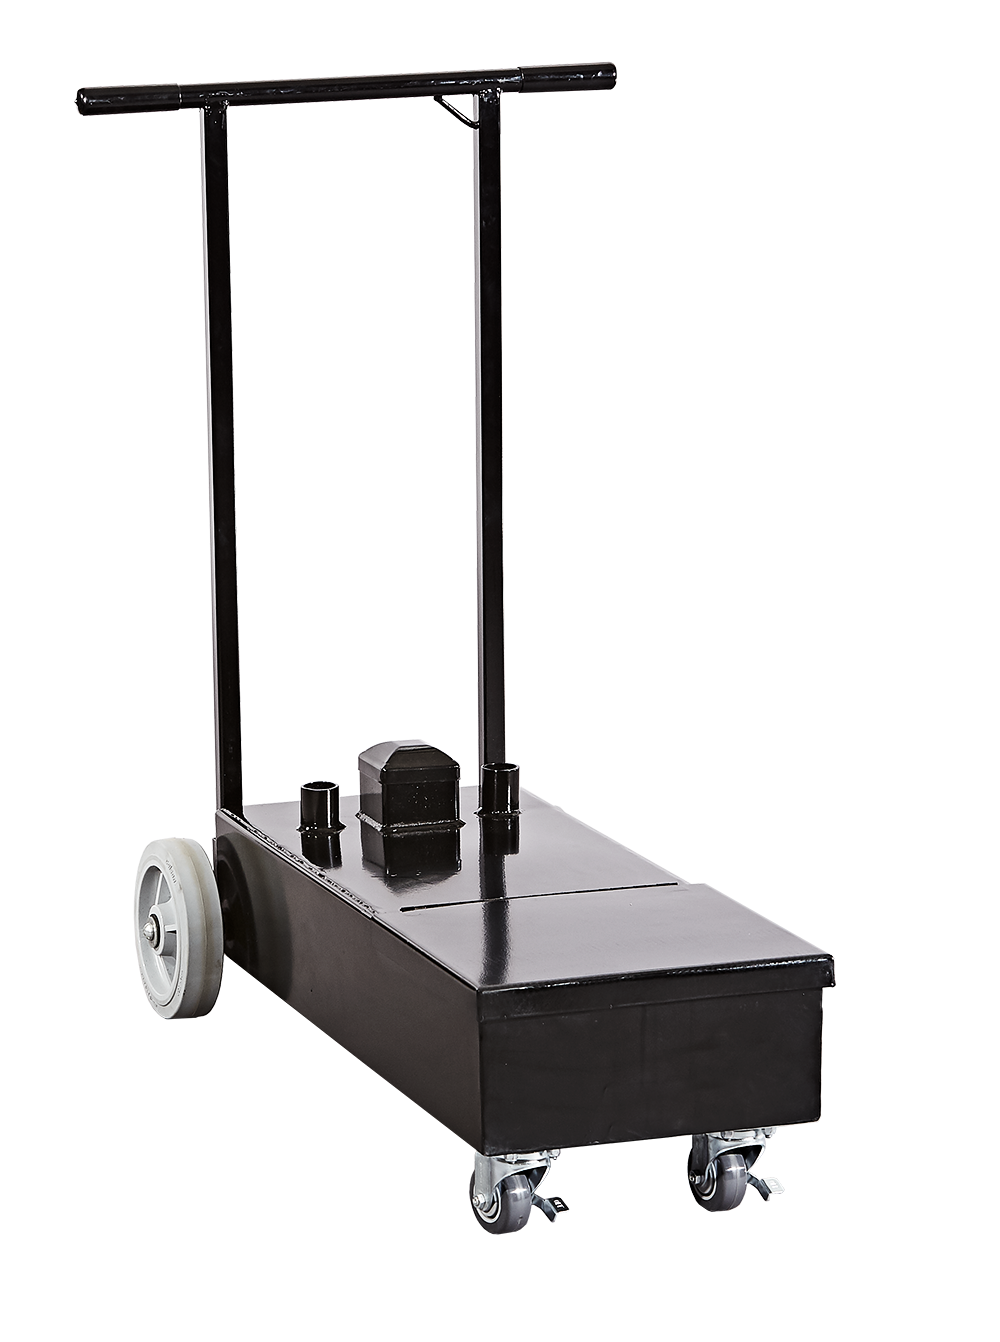 grease shuttle, grease caddy, grease cart, heated grease caddy, heated grease cart, heated grease shuttle